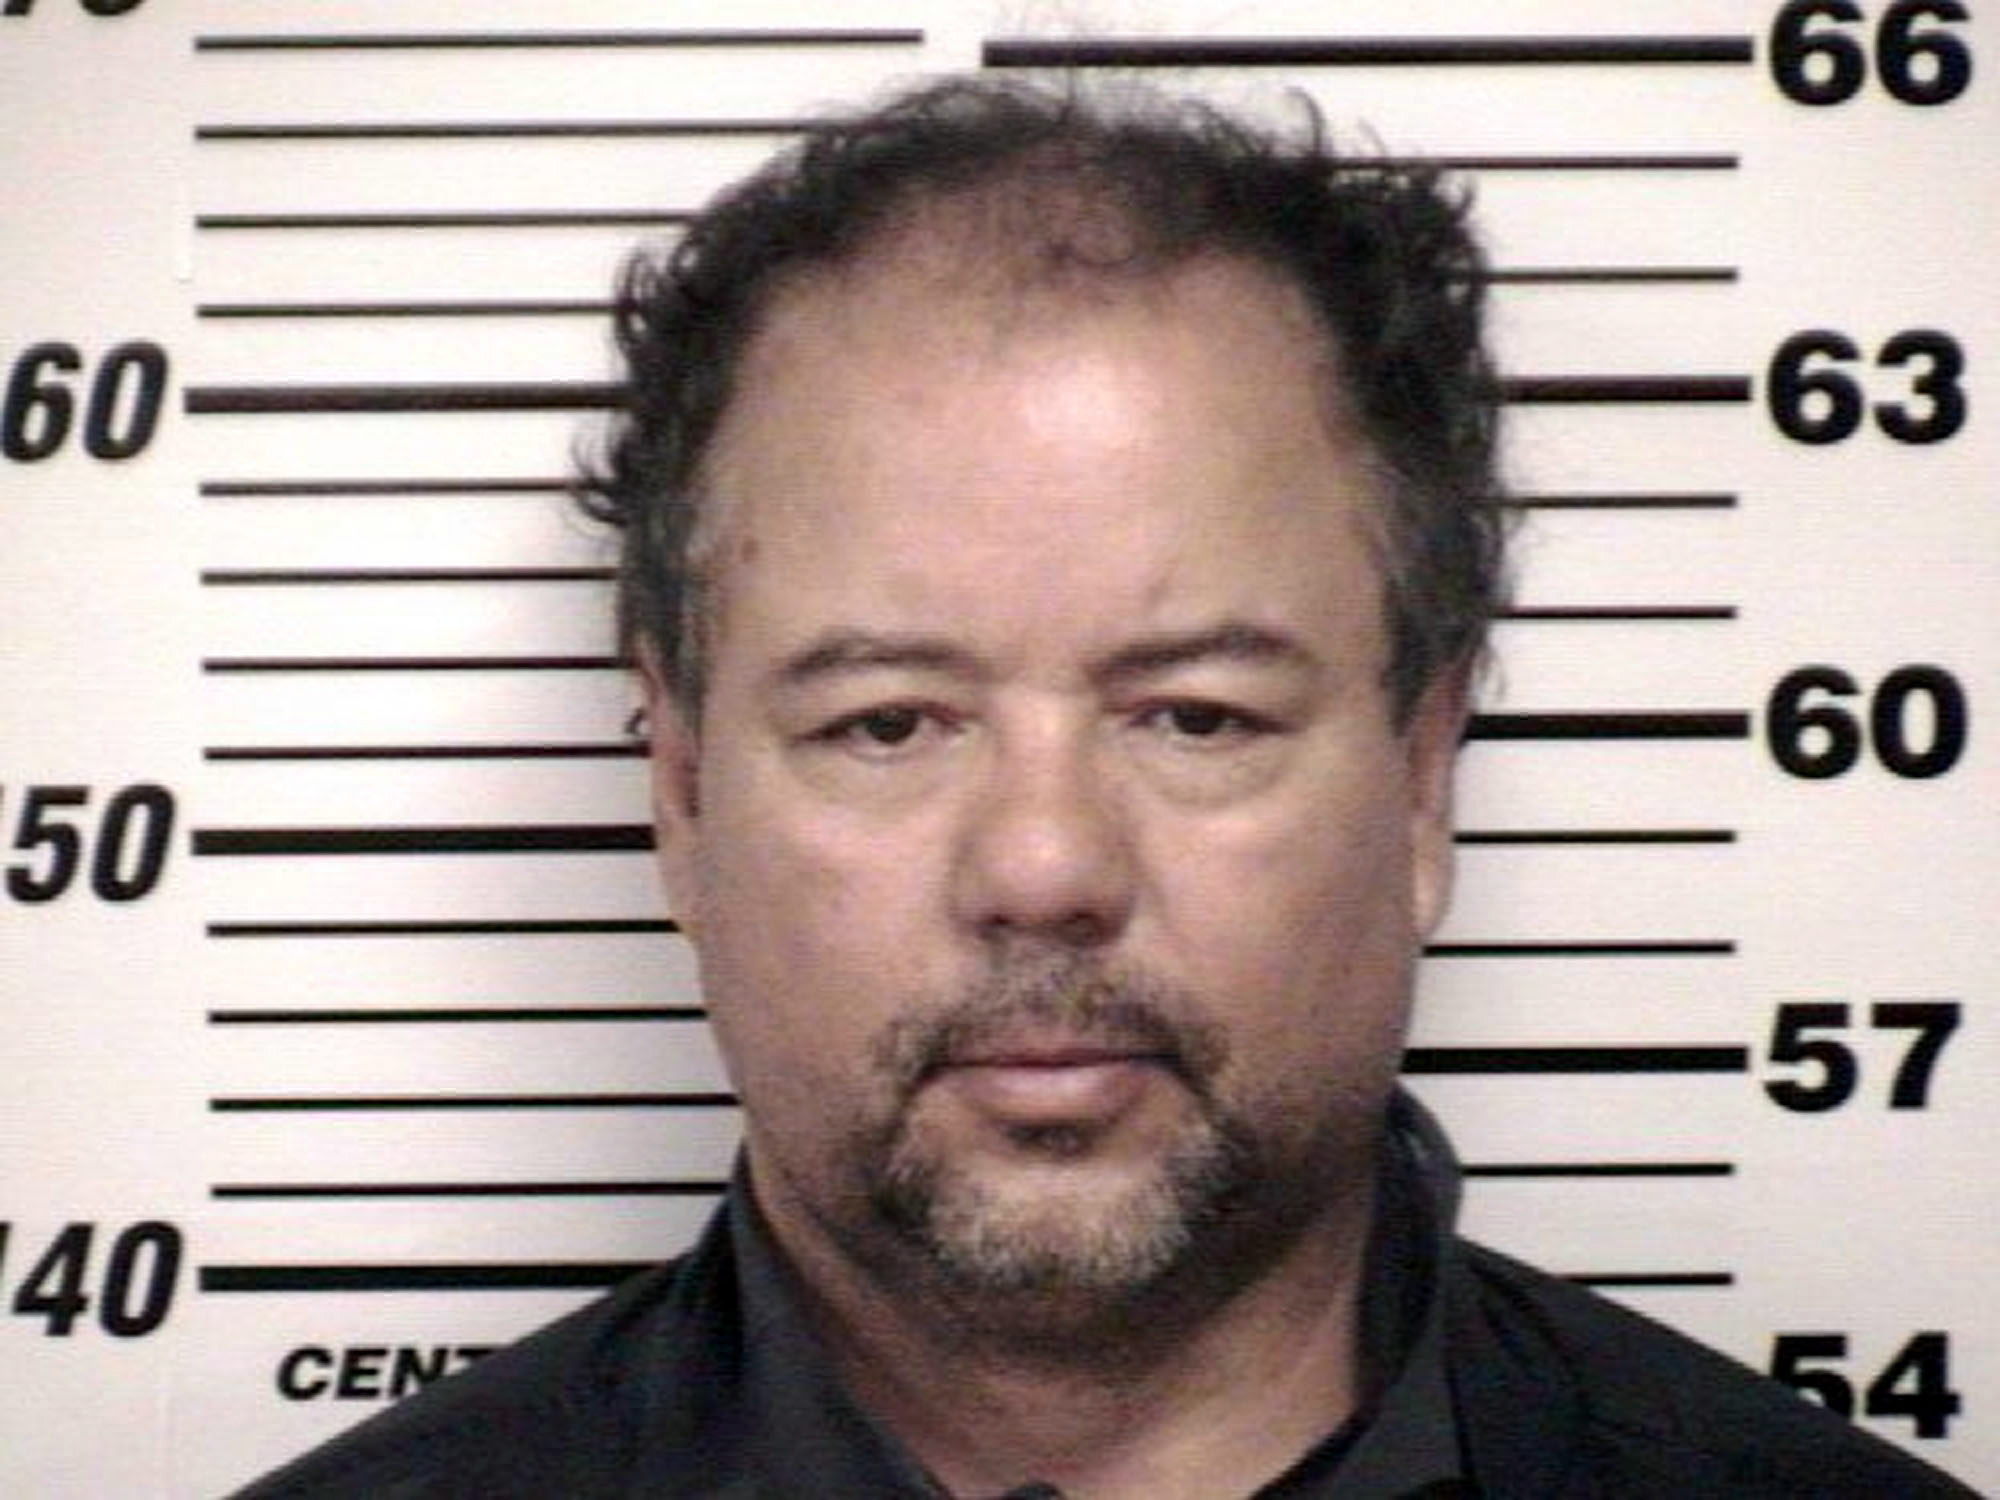 Ariel Castro, 52, is shown in a Cuyahoga County Corrections Center booking photo.